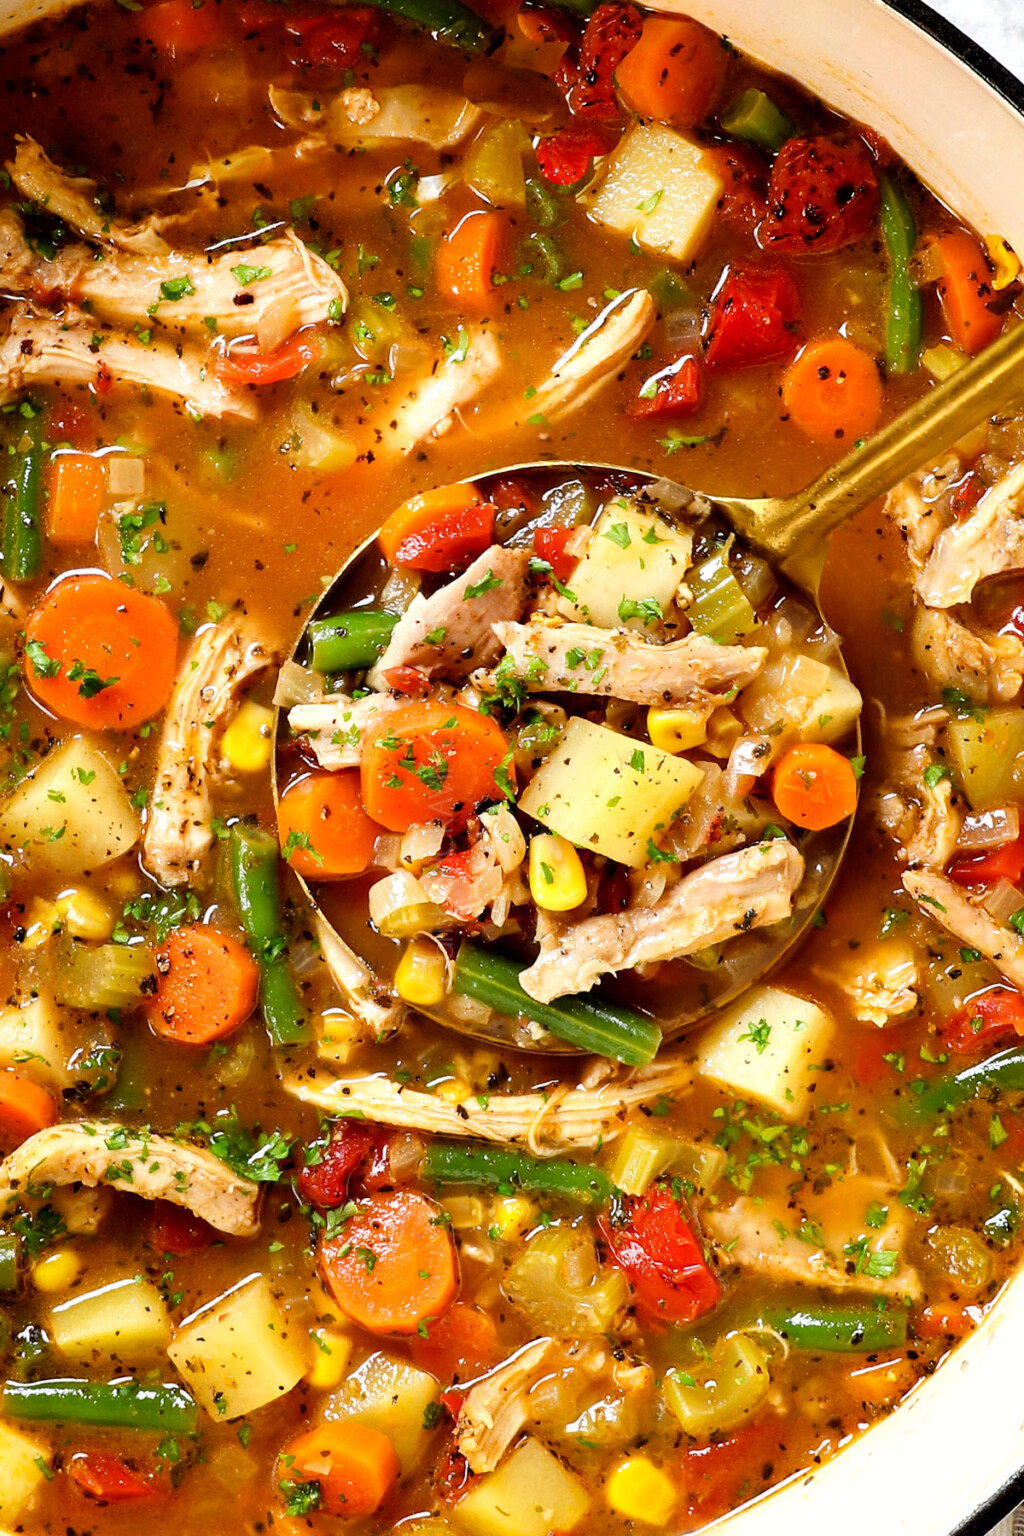 The Best Chicken Vegetable Soup Recipe - Carlsbad Cravings